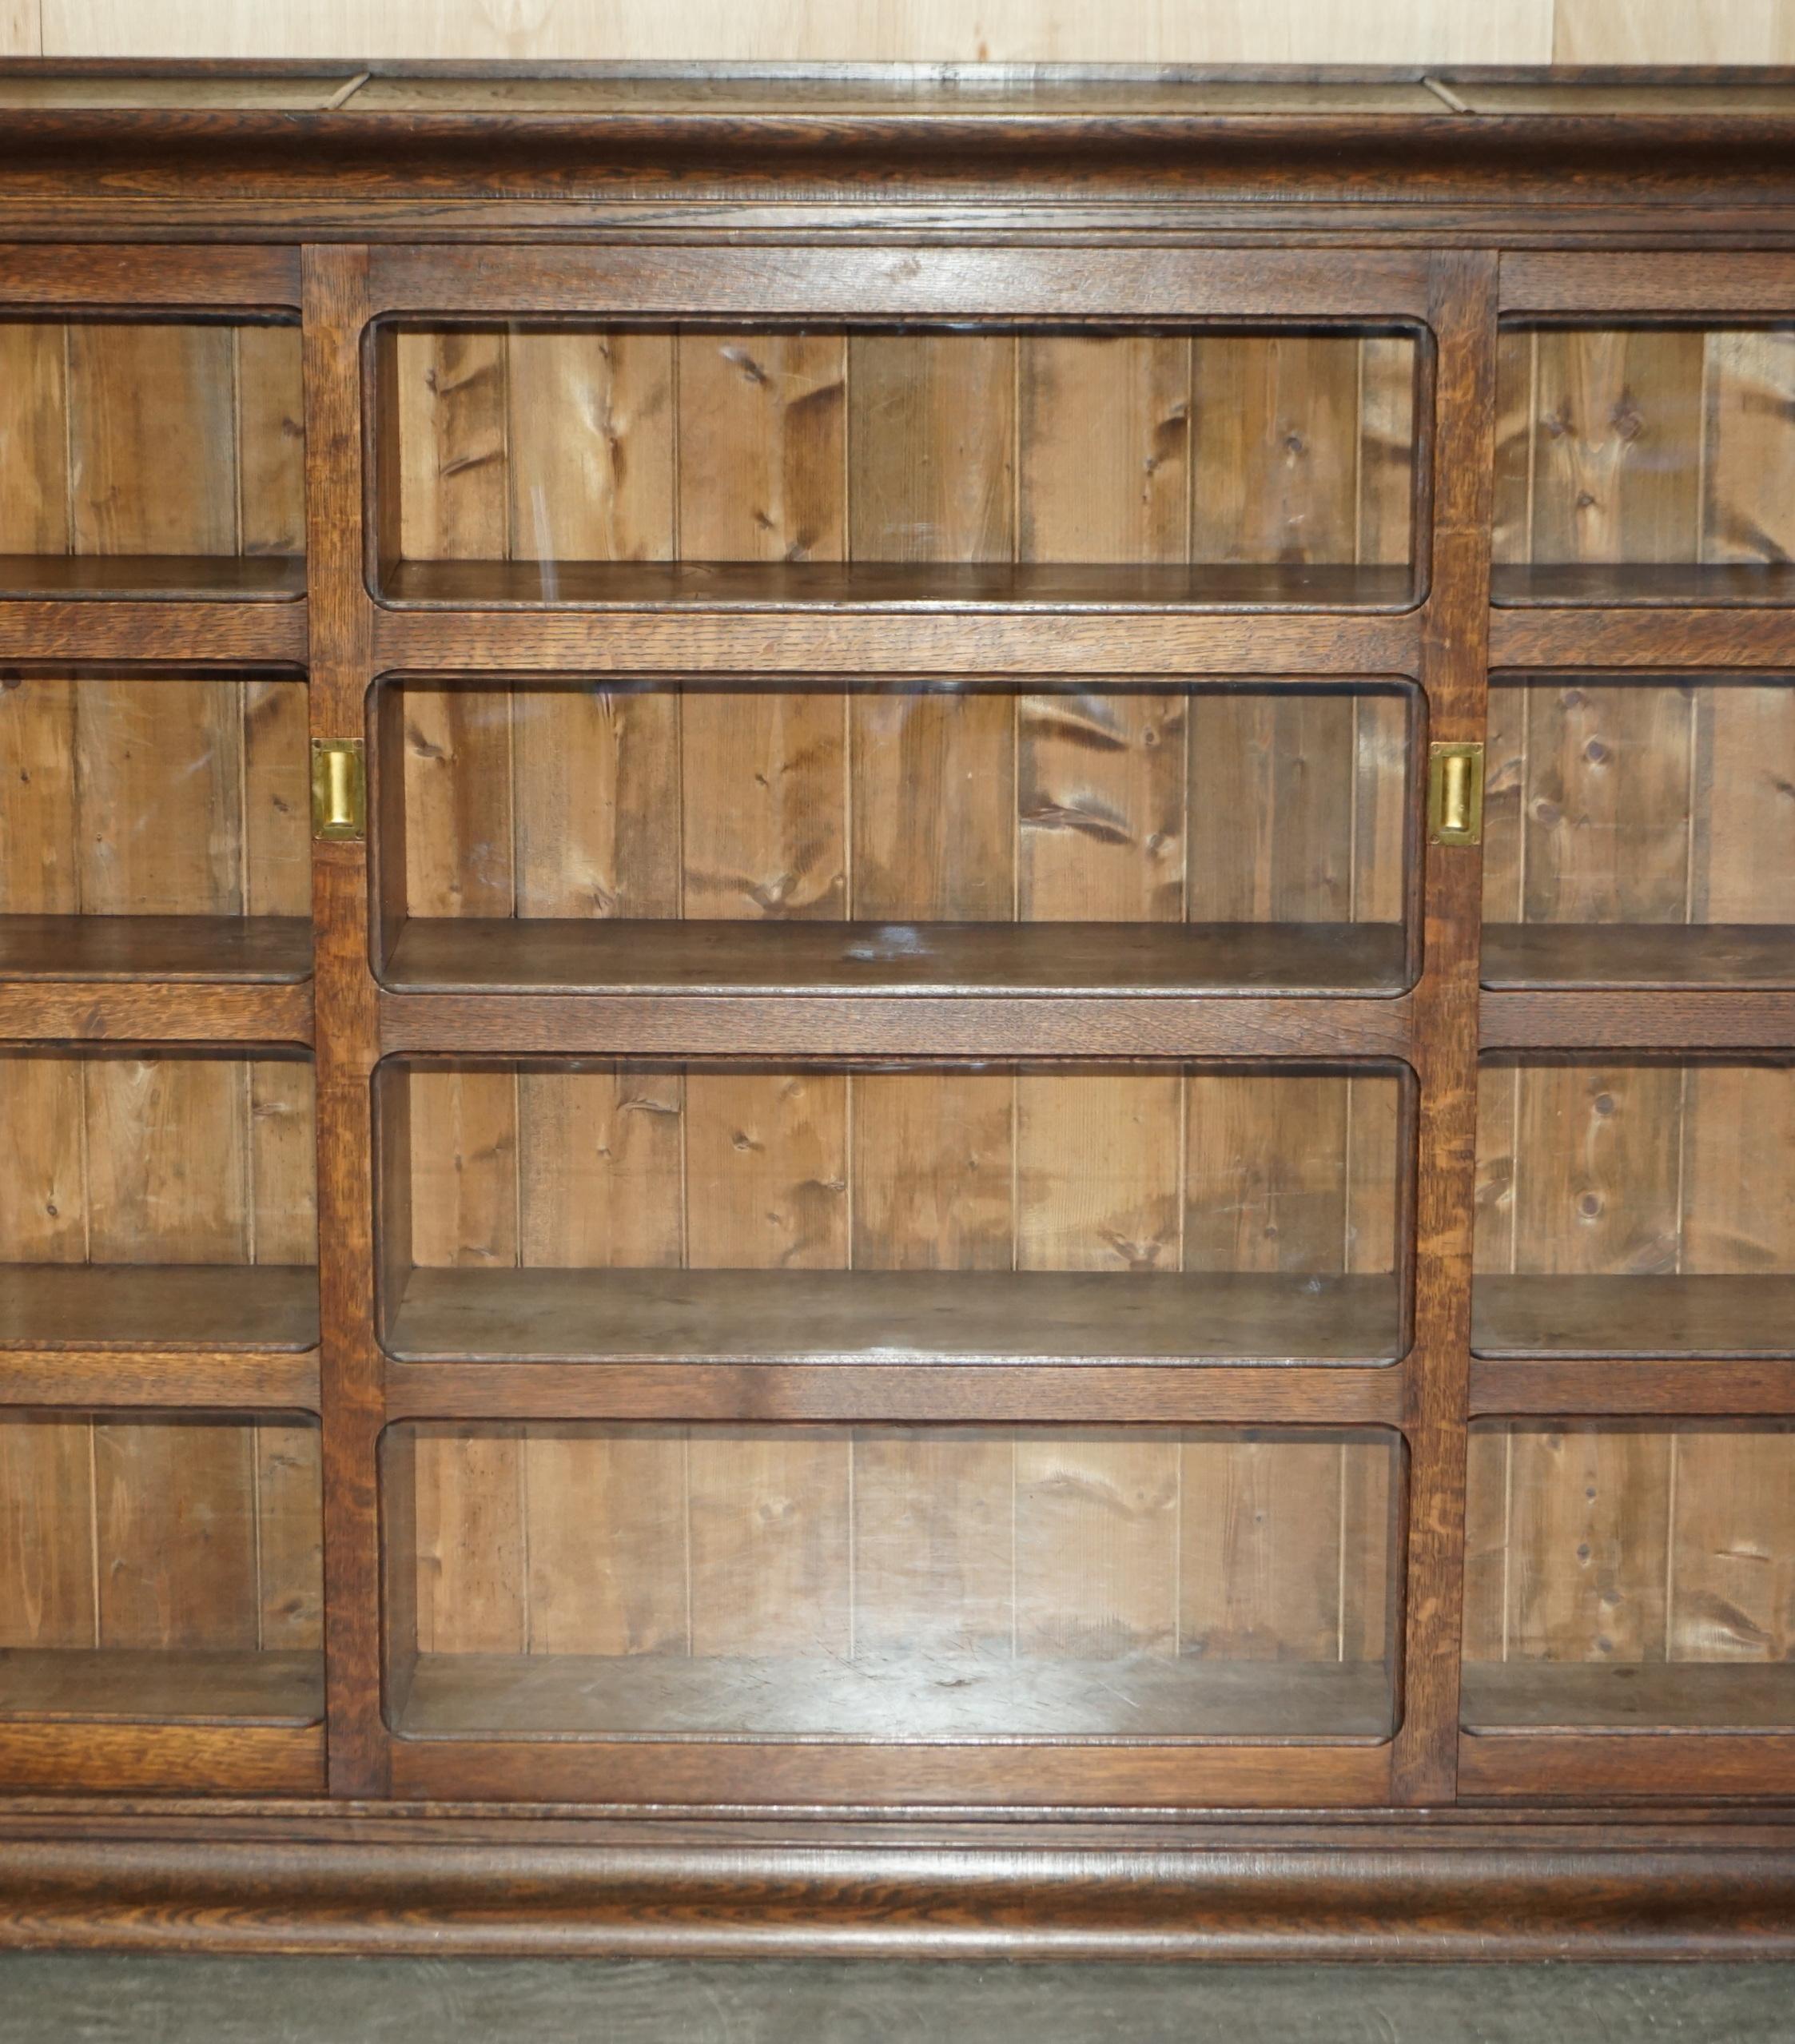 High Victorian Victorian Oak Haberdashery Apothecary Glazed Door Library Bookcase Sideboard For Sale